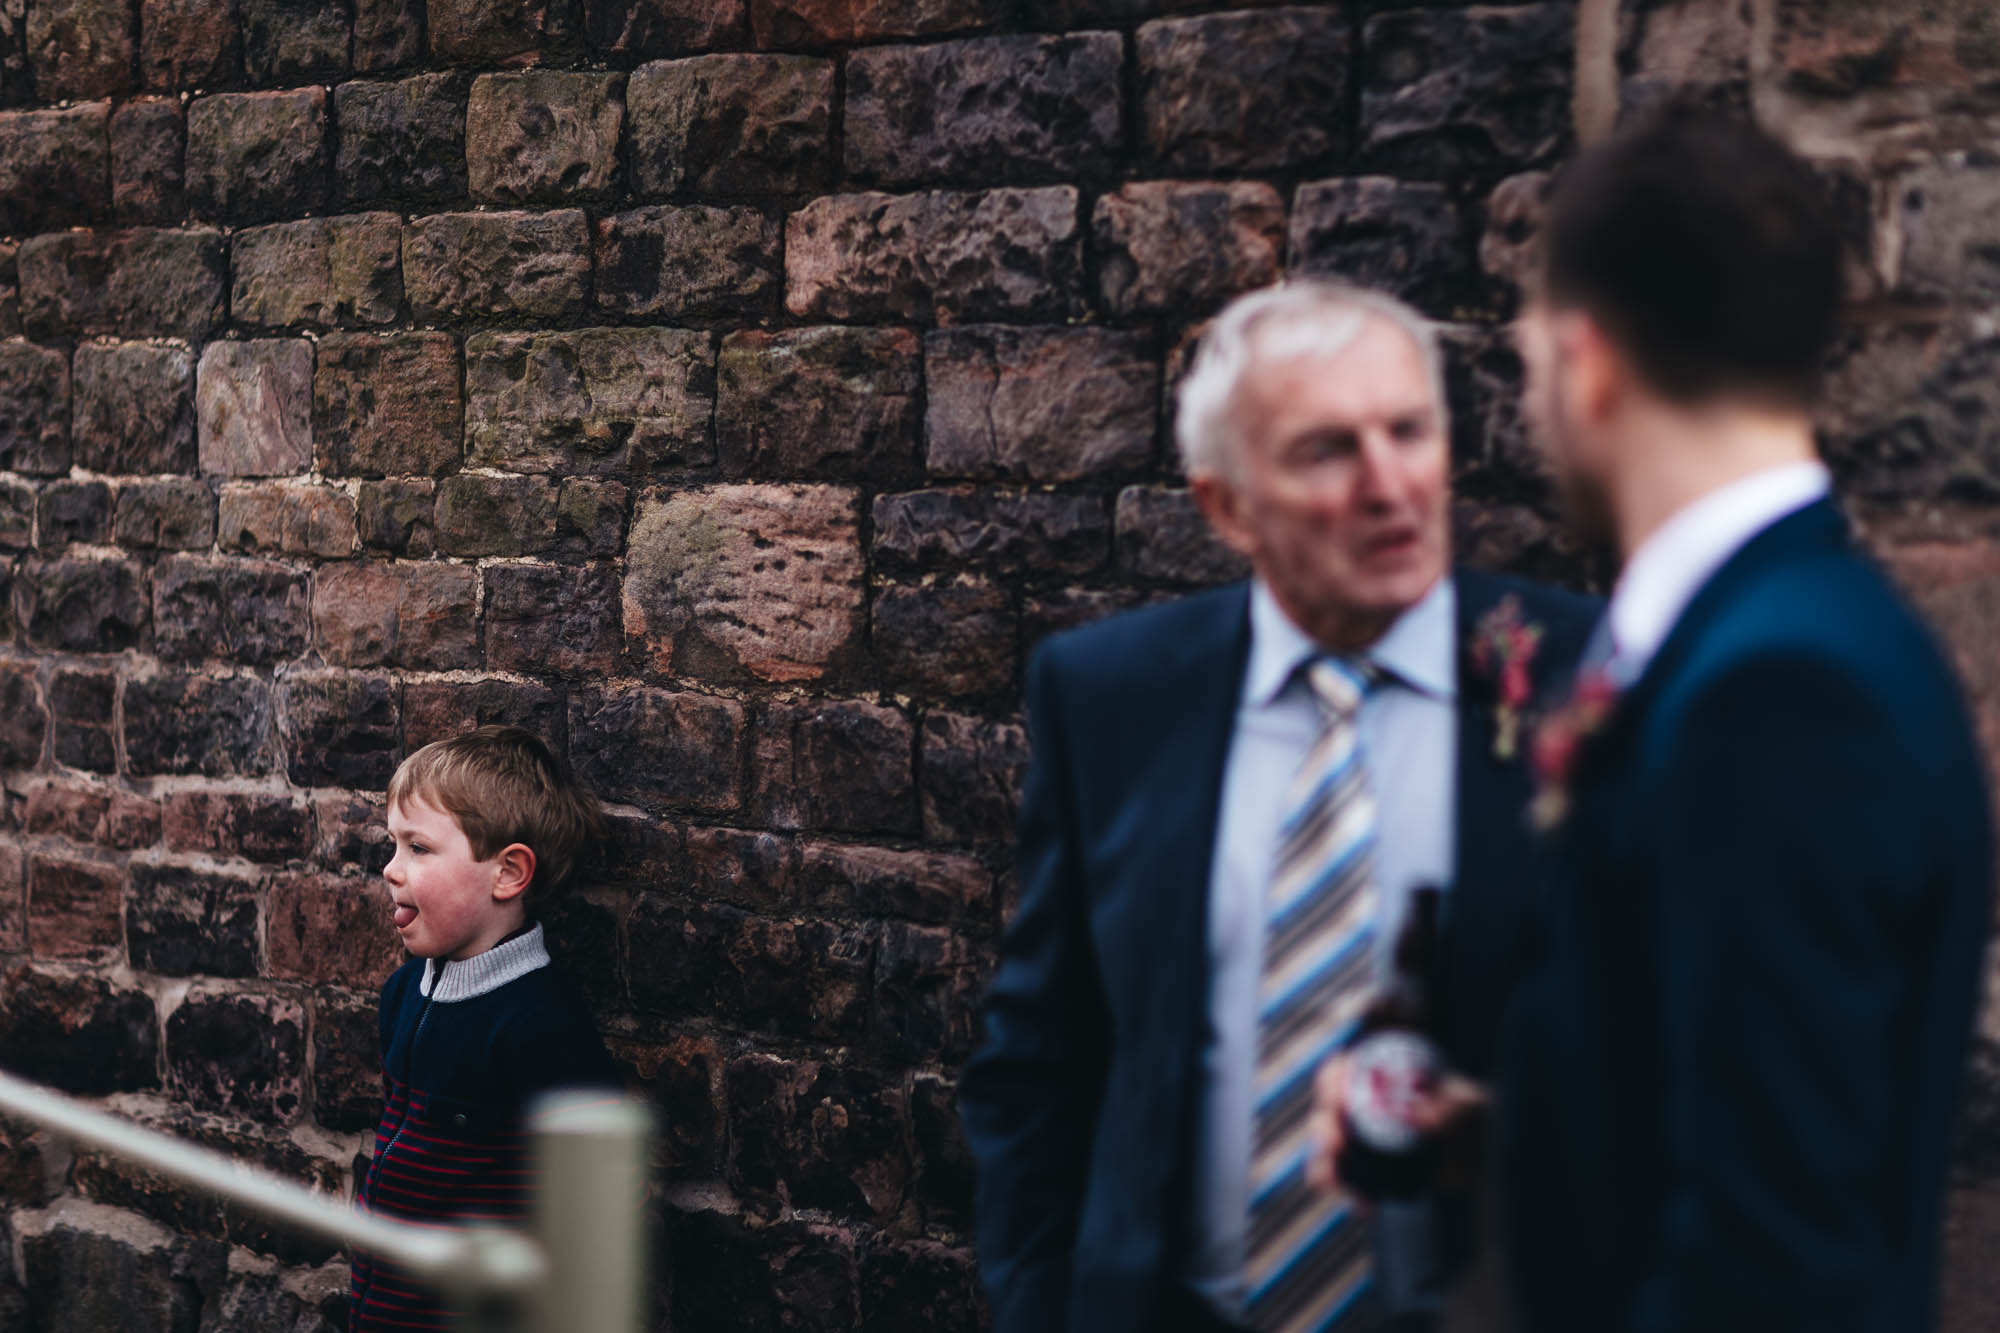 Young boy sticks his tongue out as older wedding guests talk about the ceremony outside rustic barn